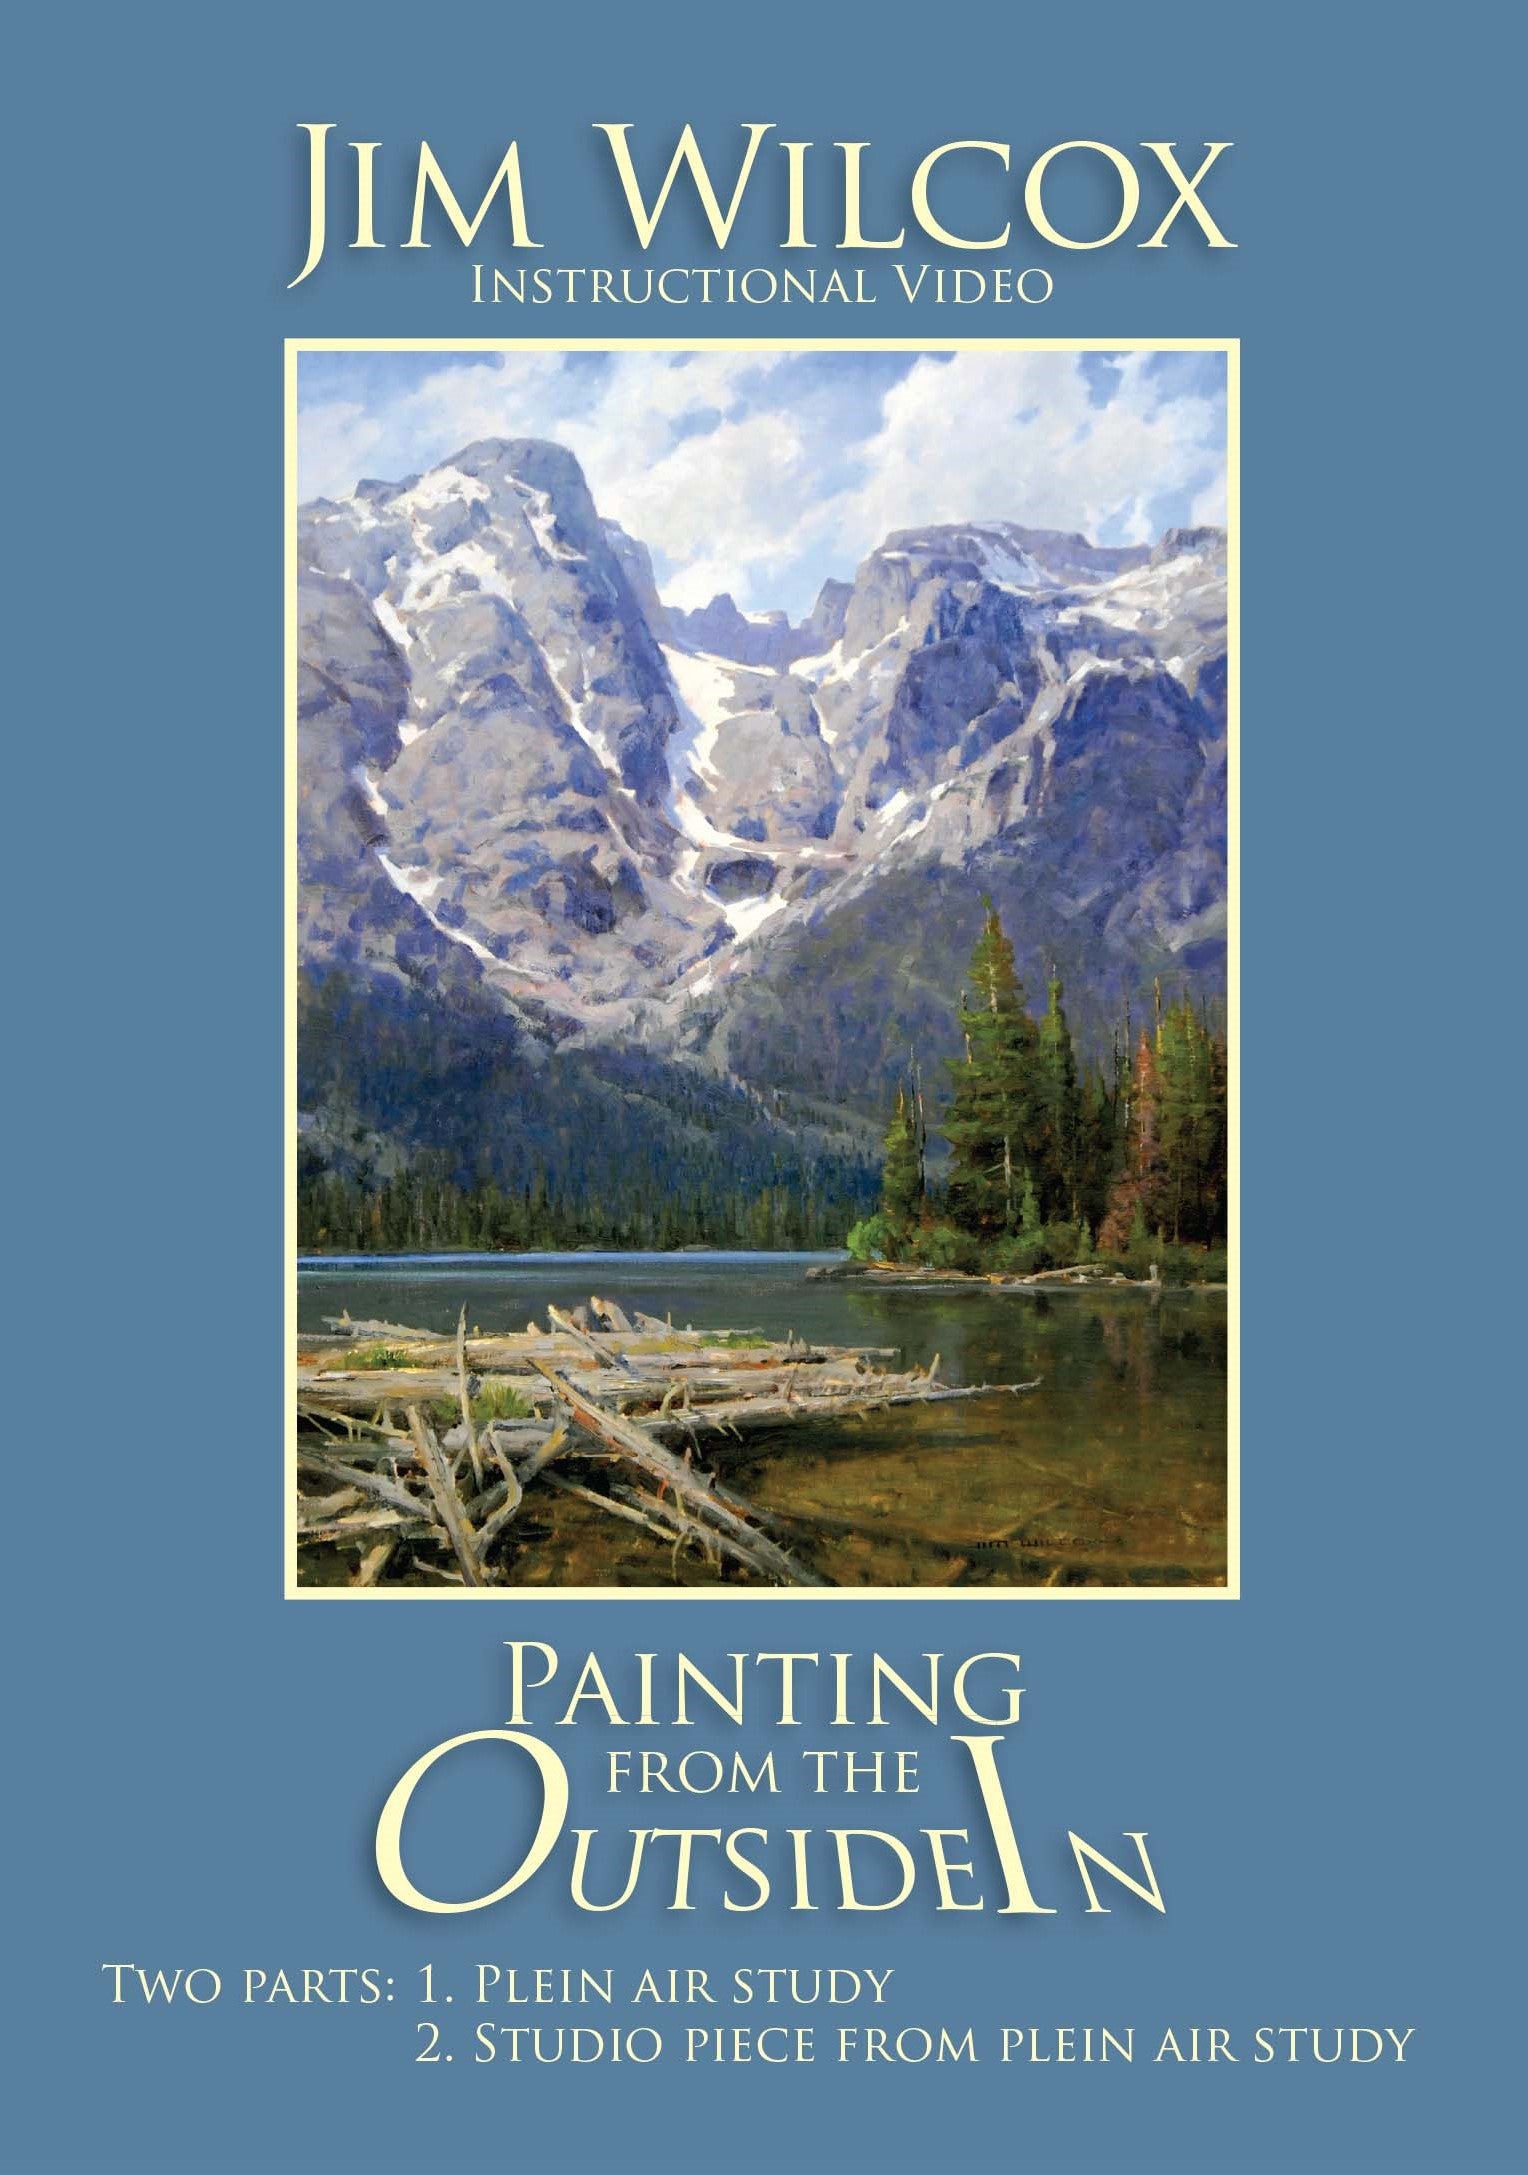 Jim Wilcox: Painting from the Outside In